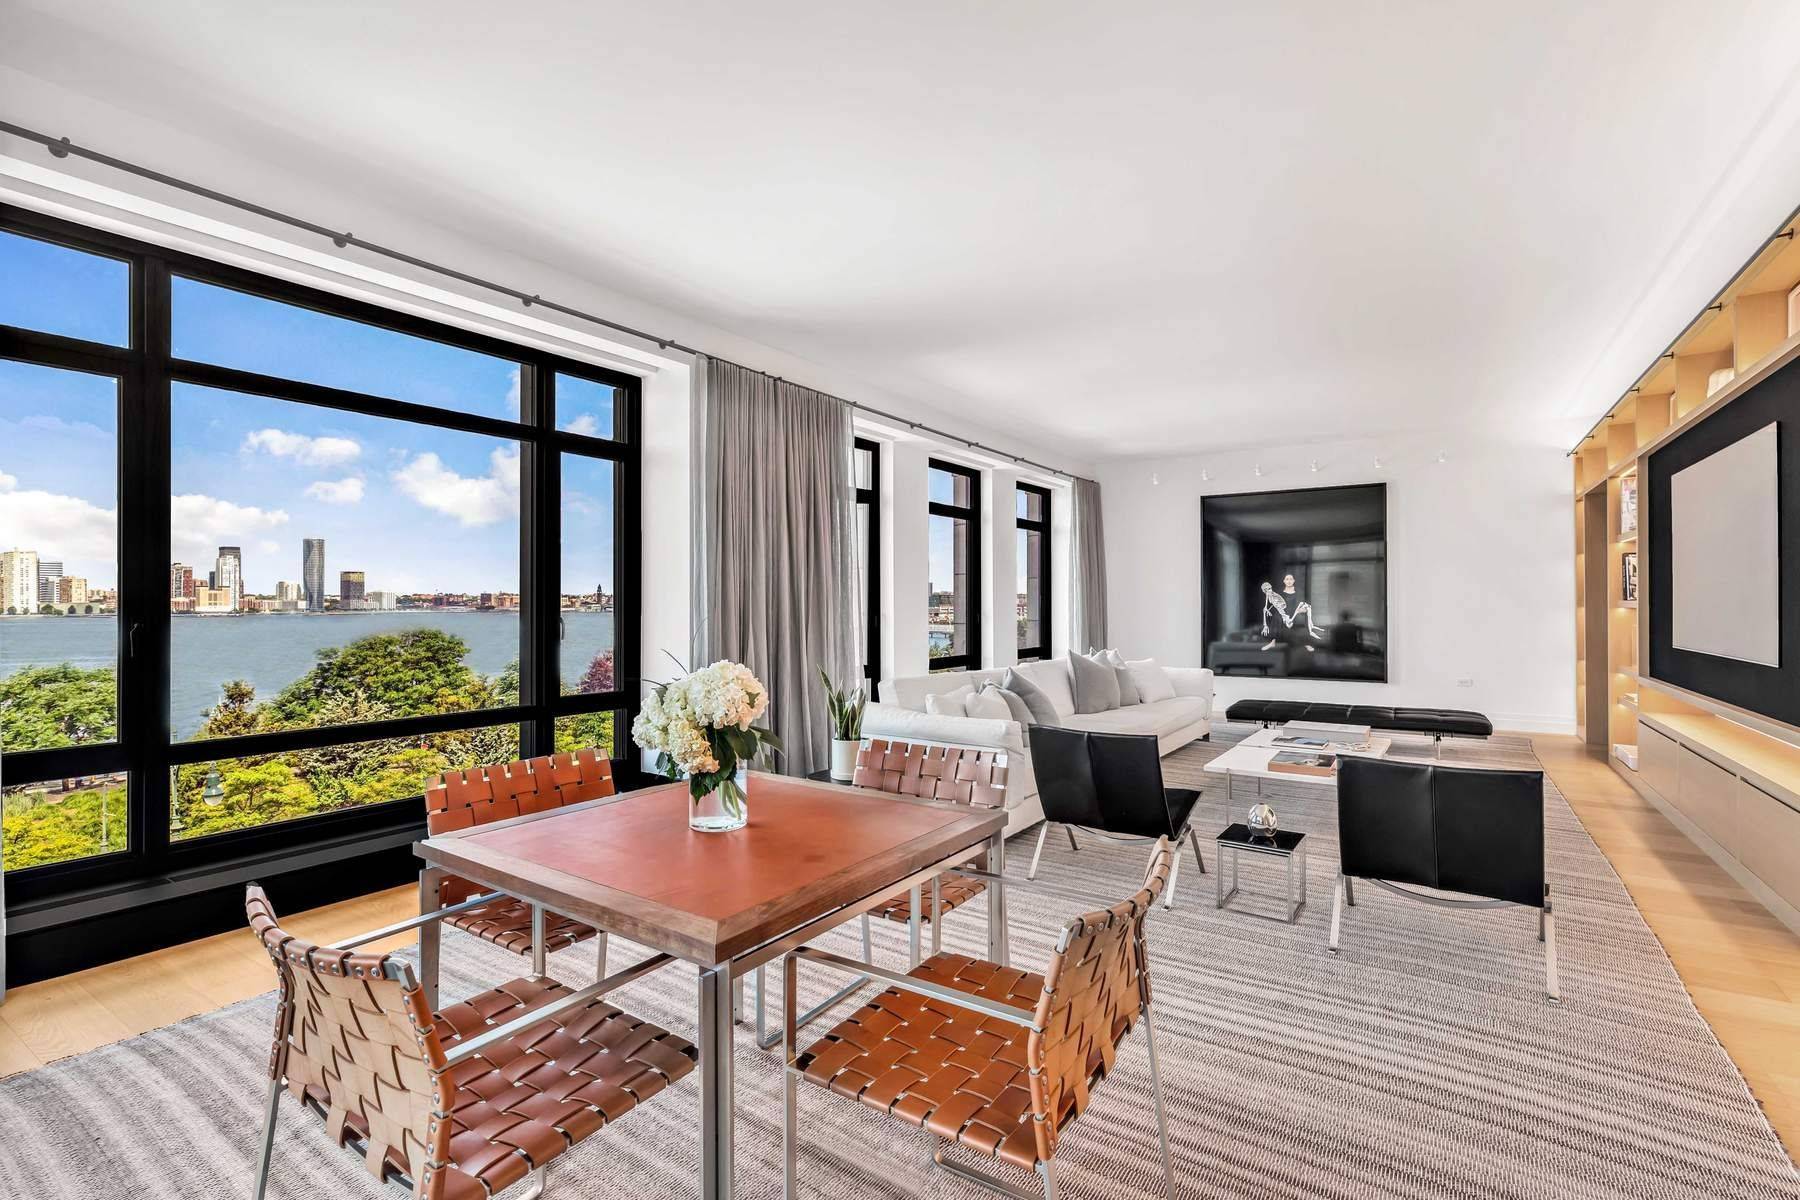 Offered fully furnished, this turn key sun flooded corner 3 Bedroom, 3 Full bath plus powder condominium features amazing views of the Statue of Liberty, the Hudson River and the ...